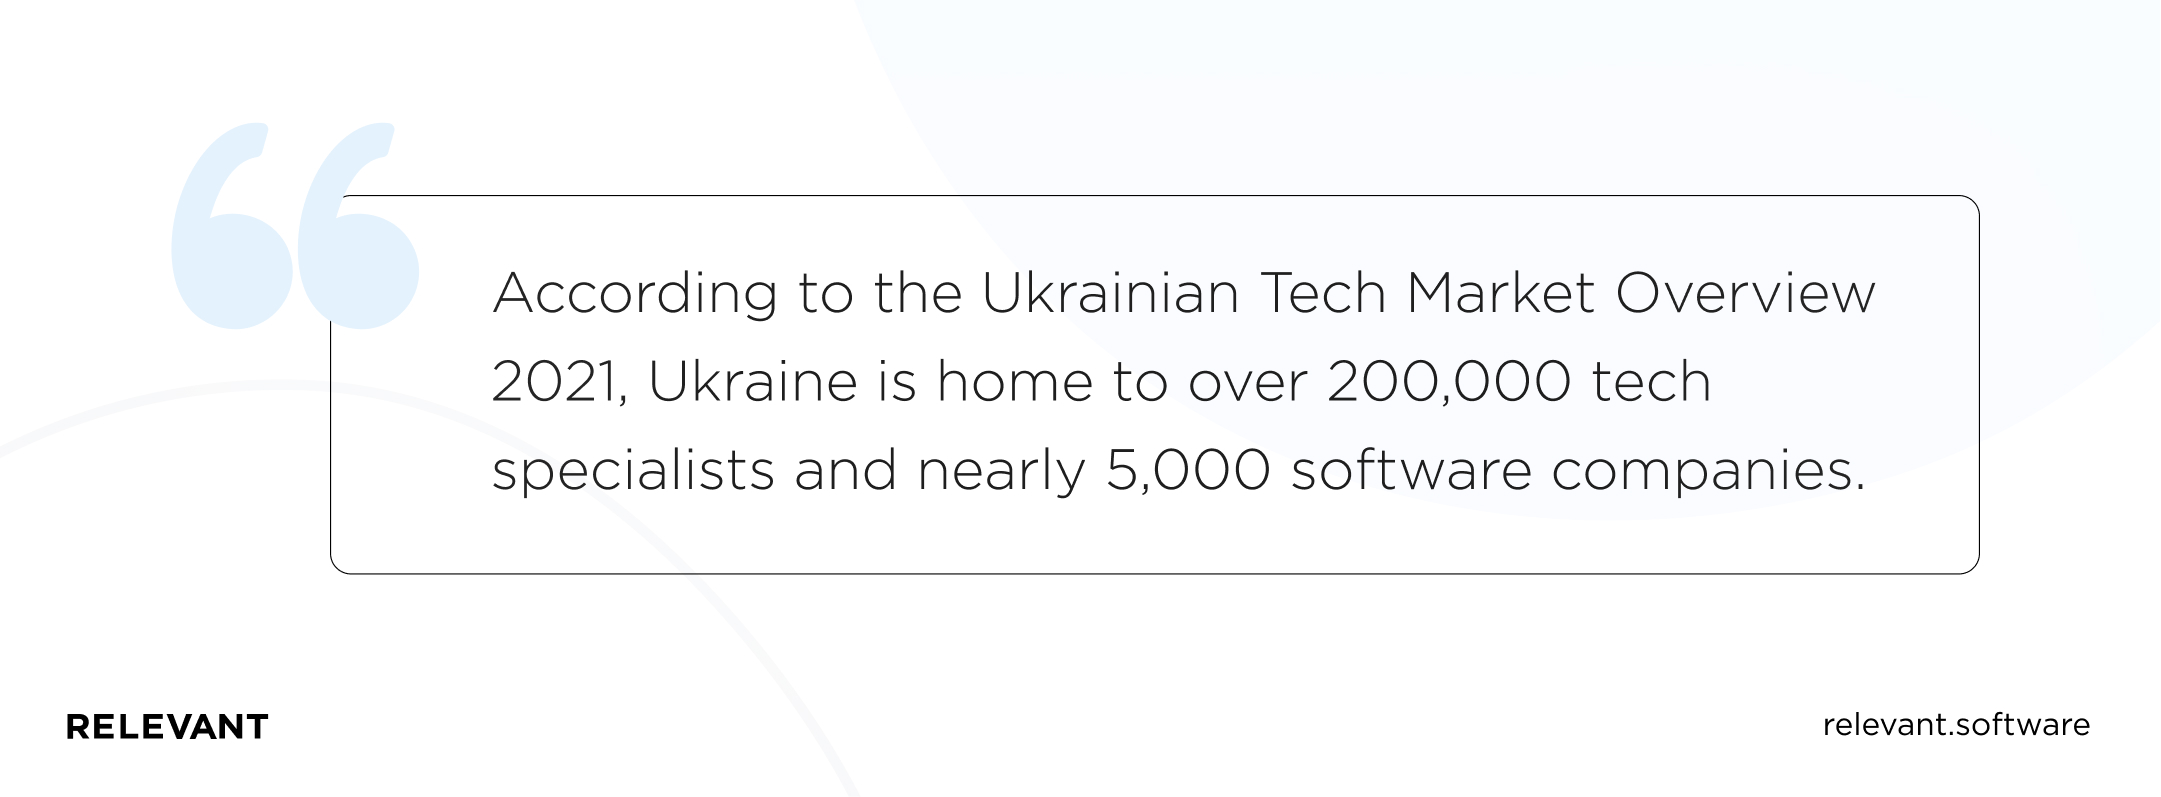 According to the Ukrainian Tech Market Overview 2021, Ukraine is home to over 200,000 tech specialists and nearly 5,000 software companies.